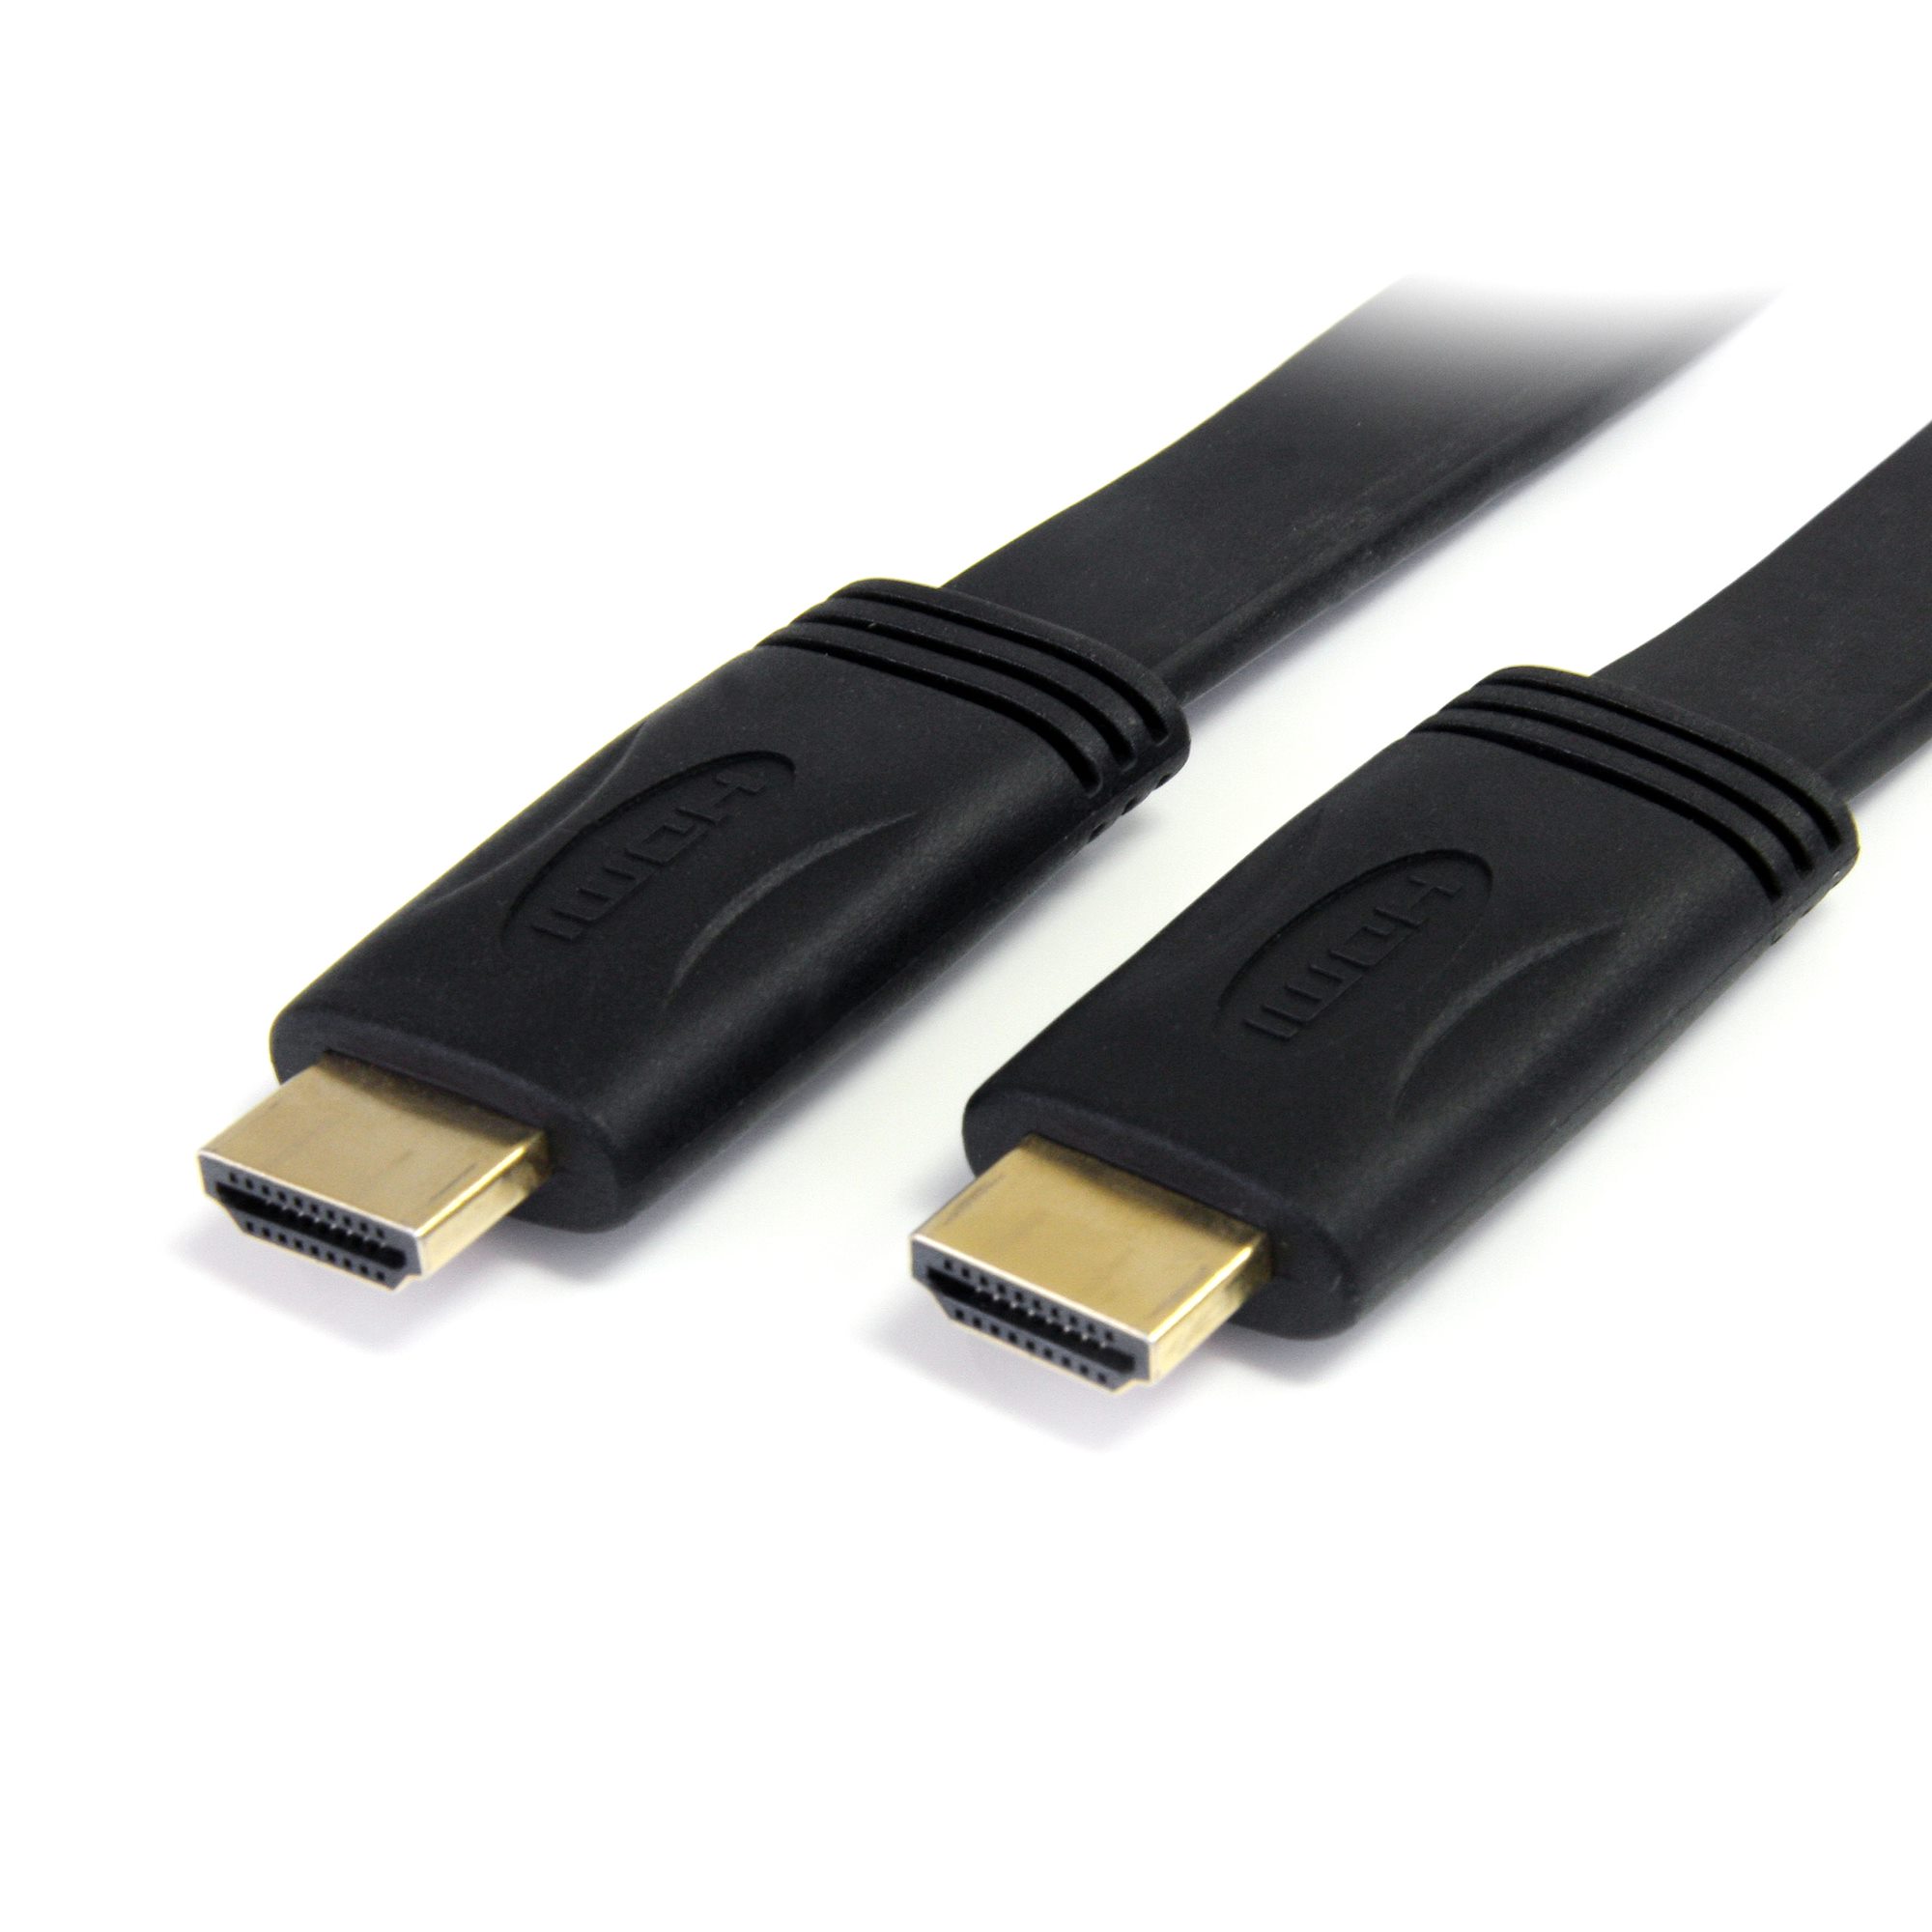 5m High Speed HDMI Flat Cable with Ethernet A/A M/M - HDMI Cables